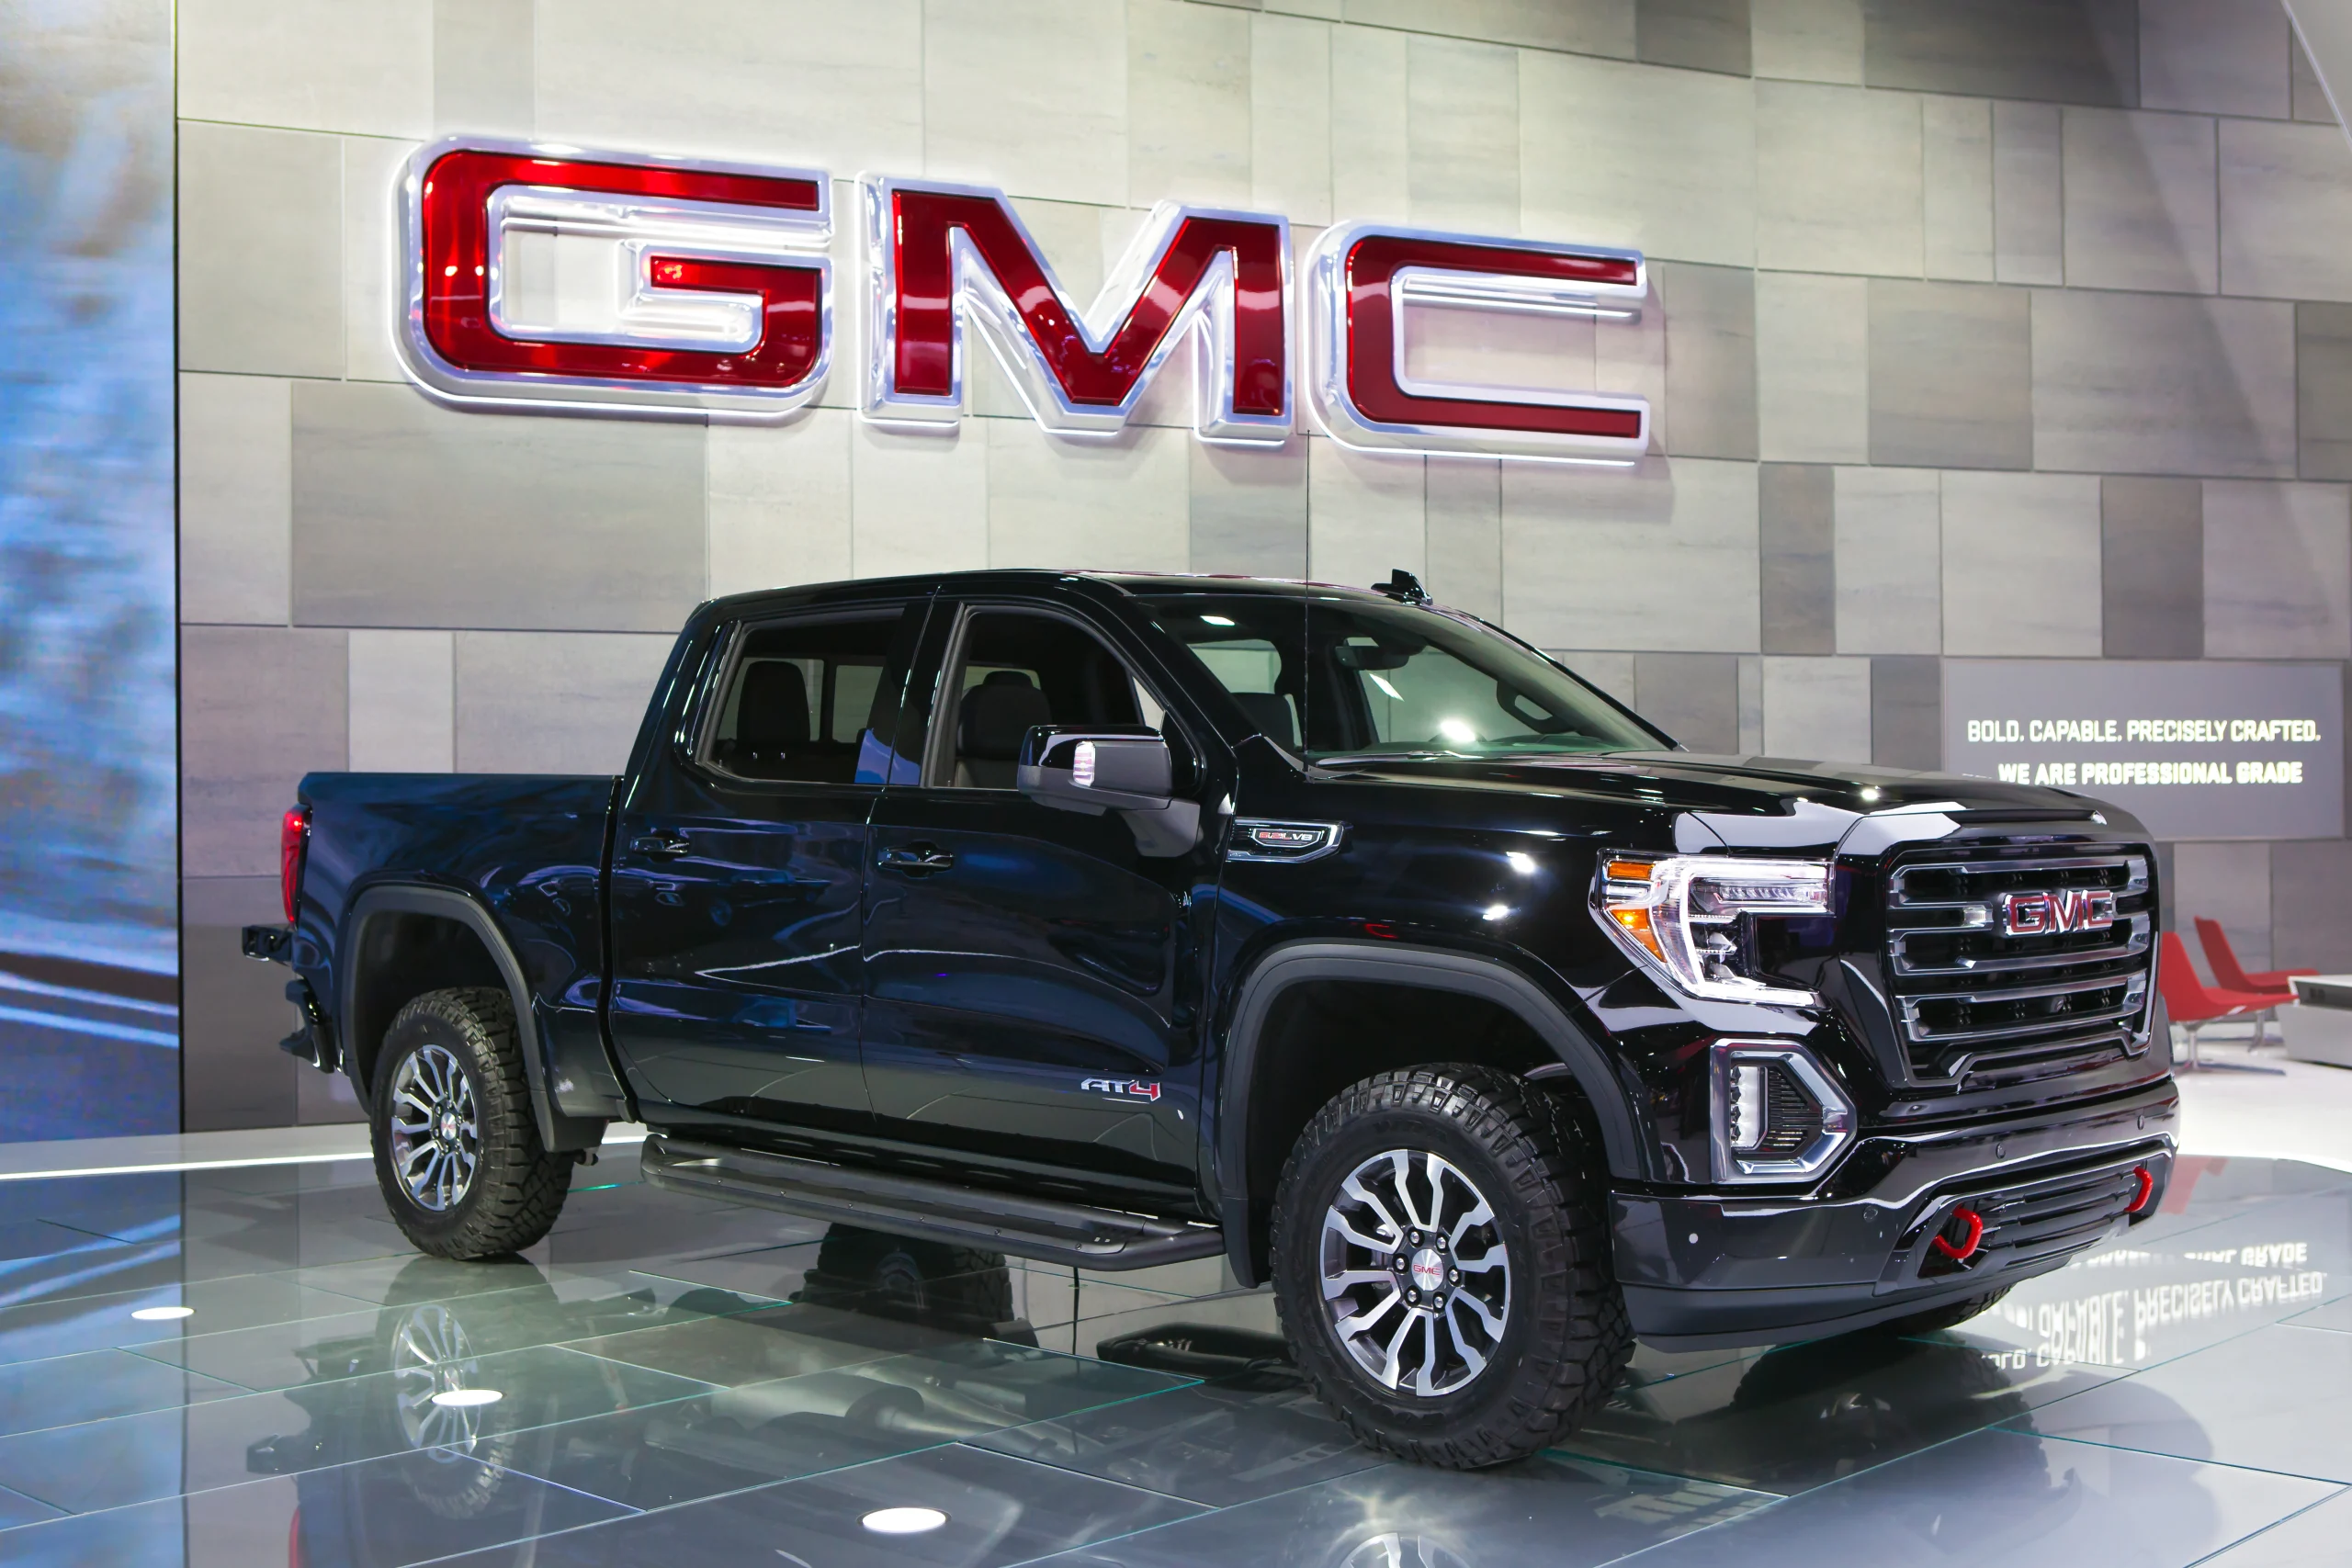 GM issues second recall for Chevrolet Silverados and GMC Sierras over